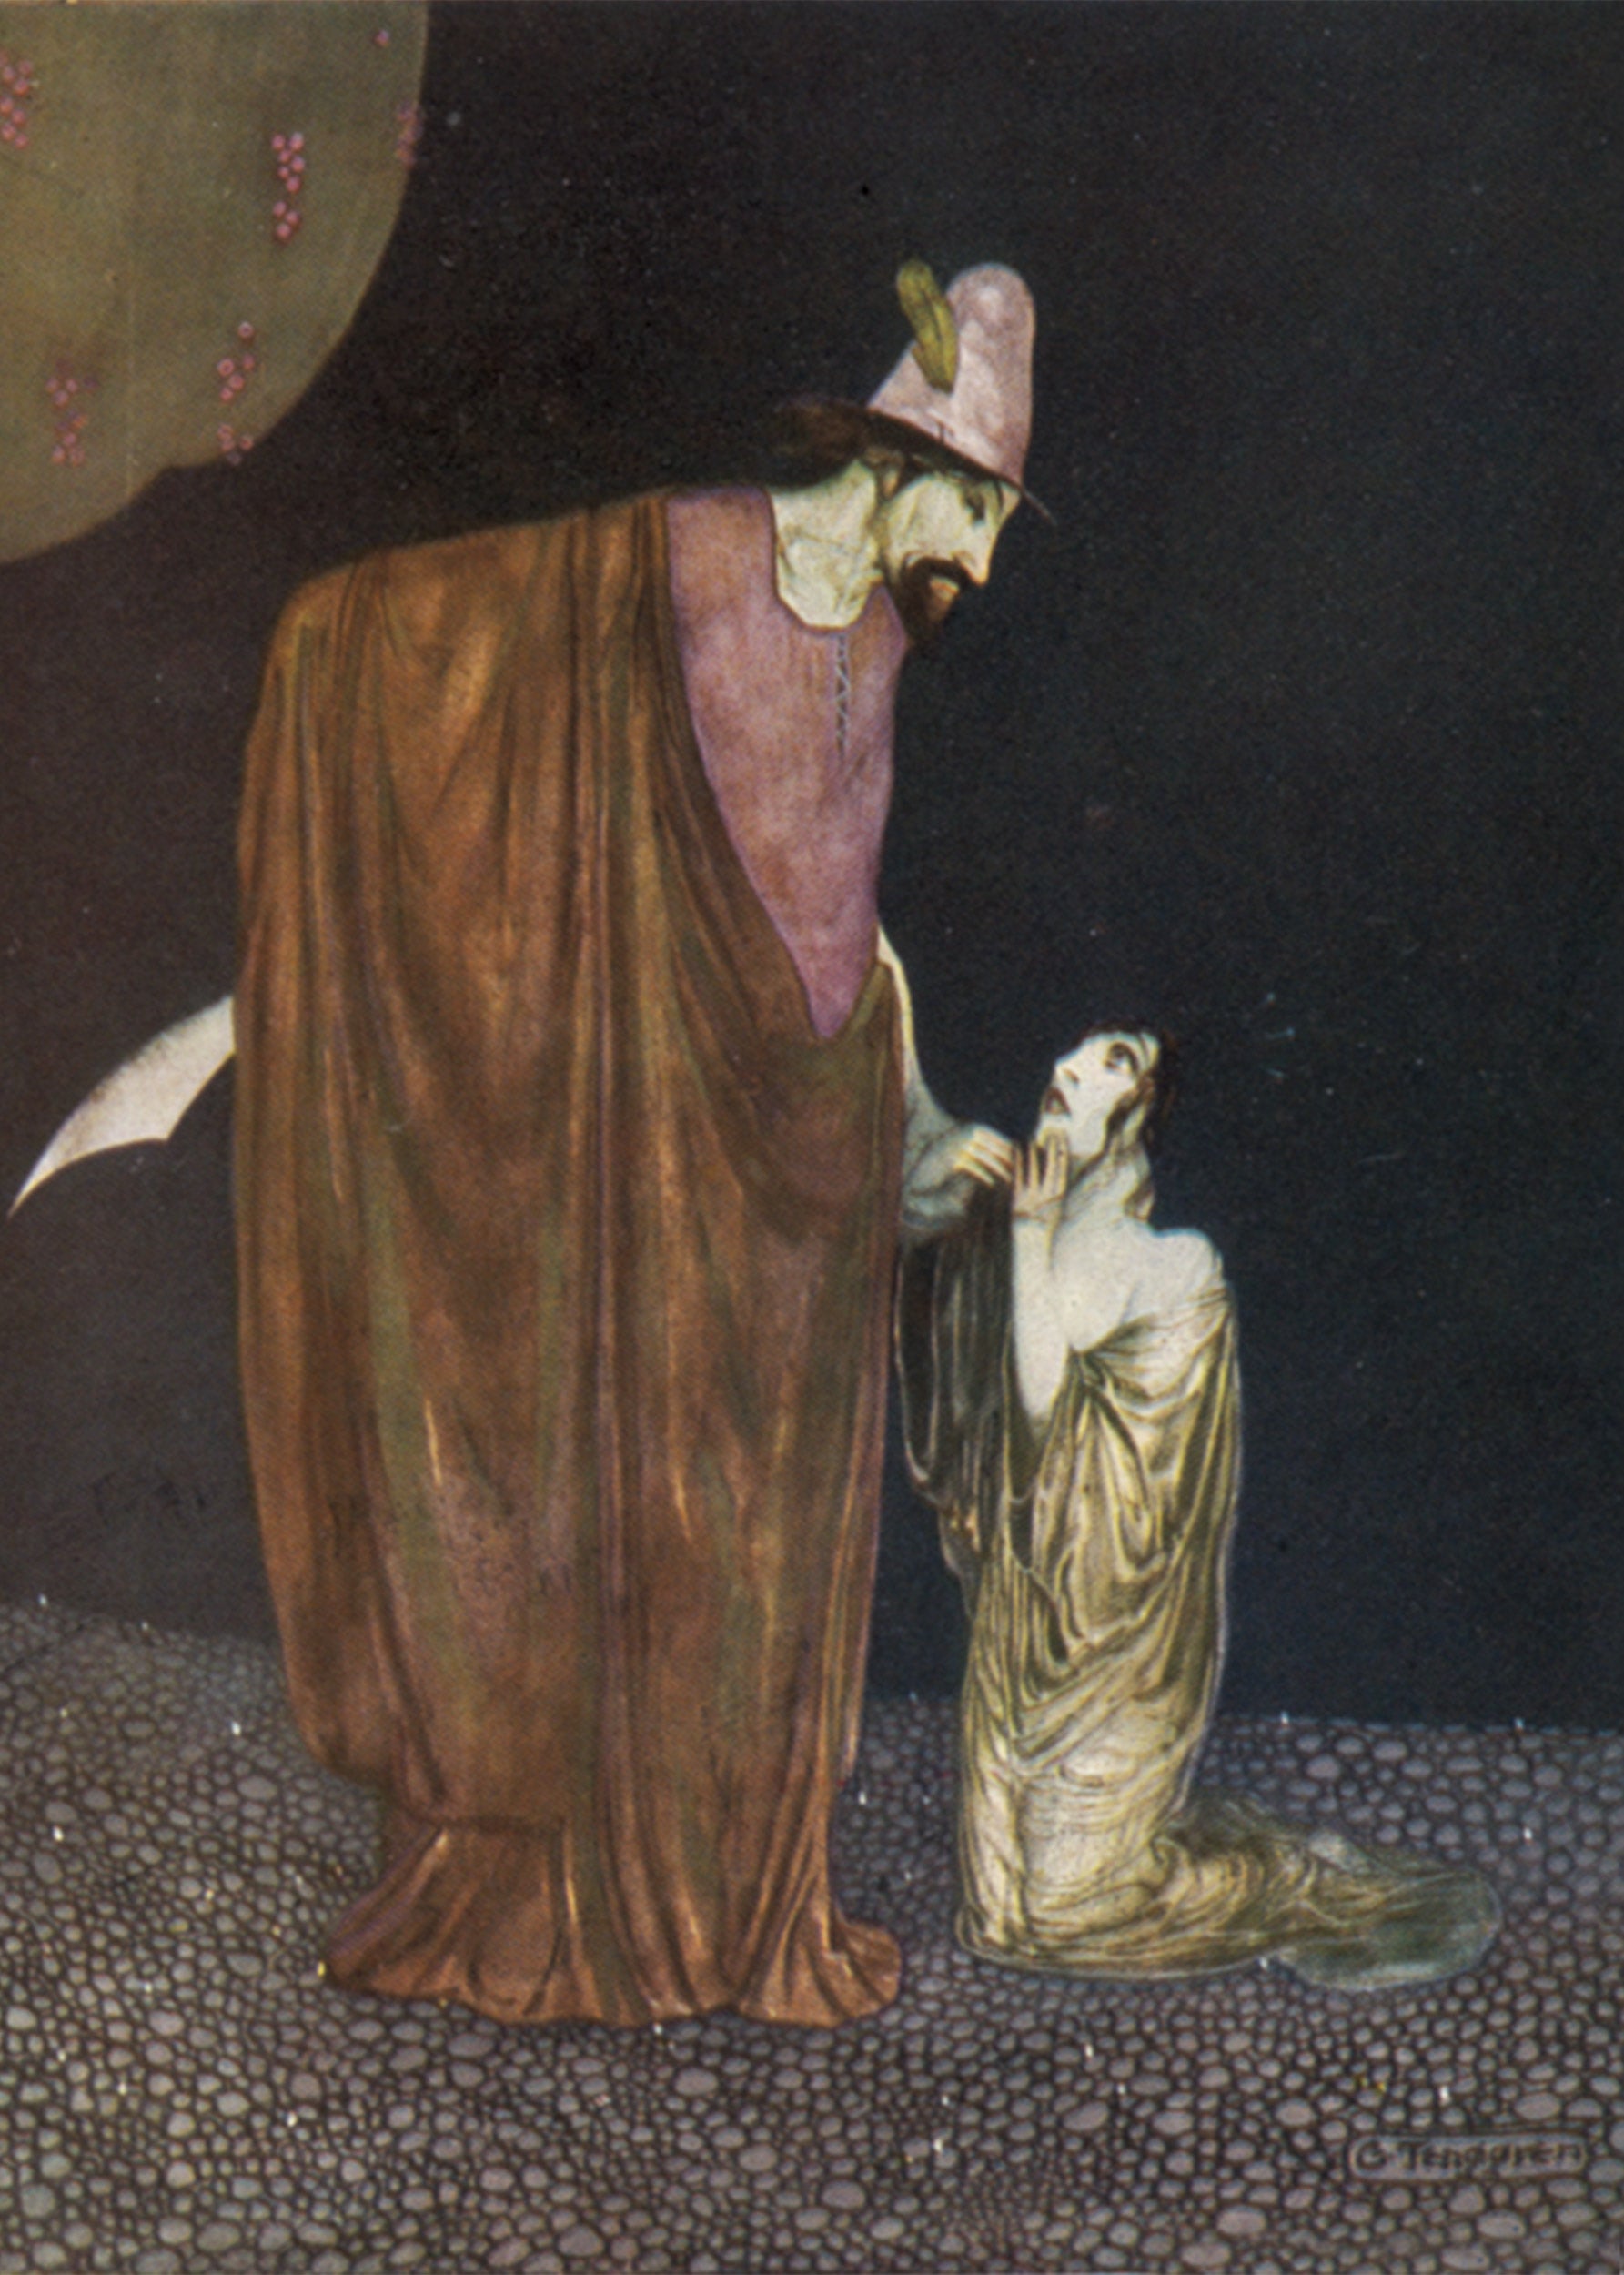 A 1923 illustration of Snow White and the hunter by Gustaf Tenggren.